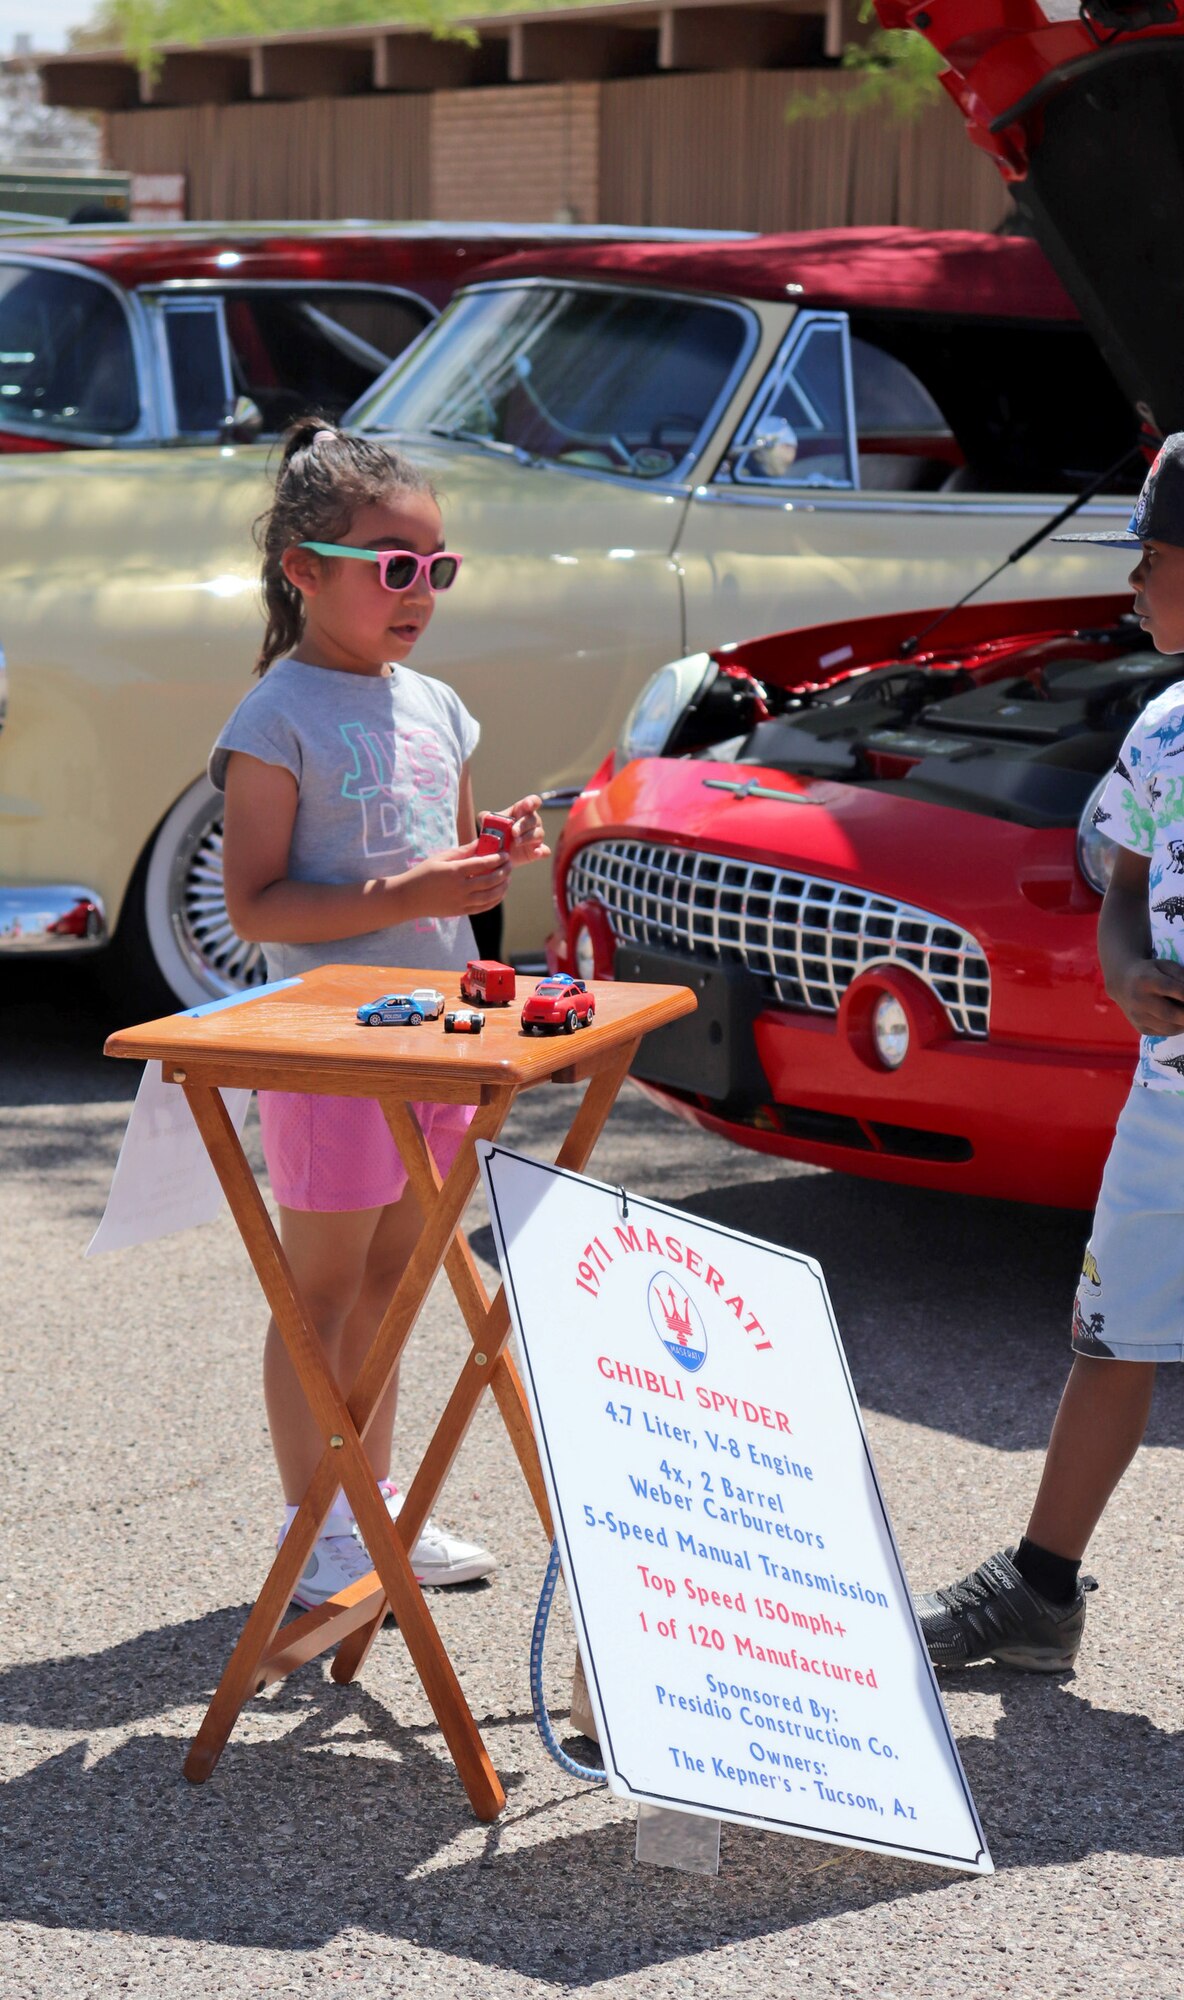 A photo of children at a car show.